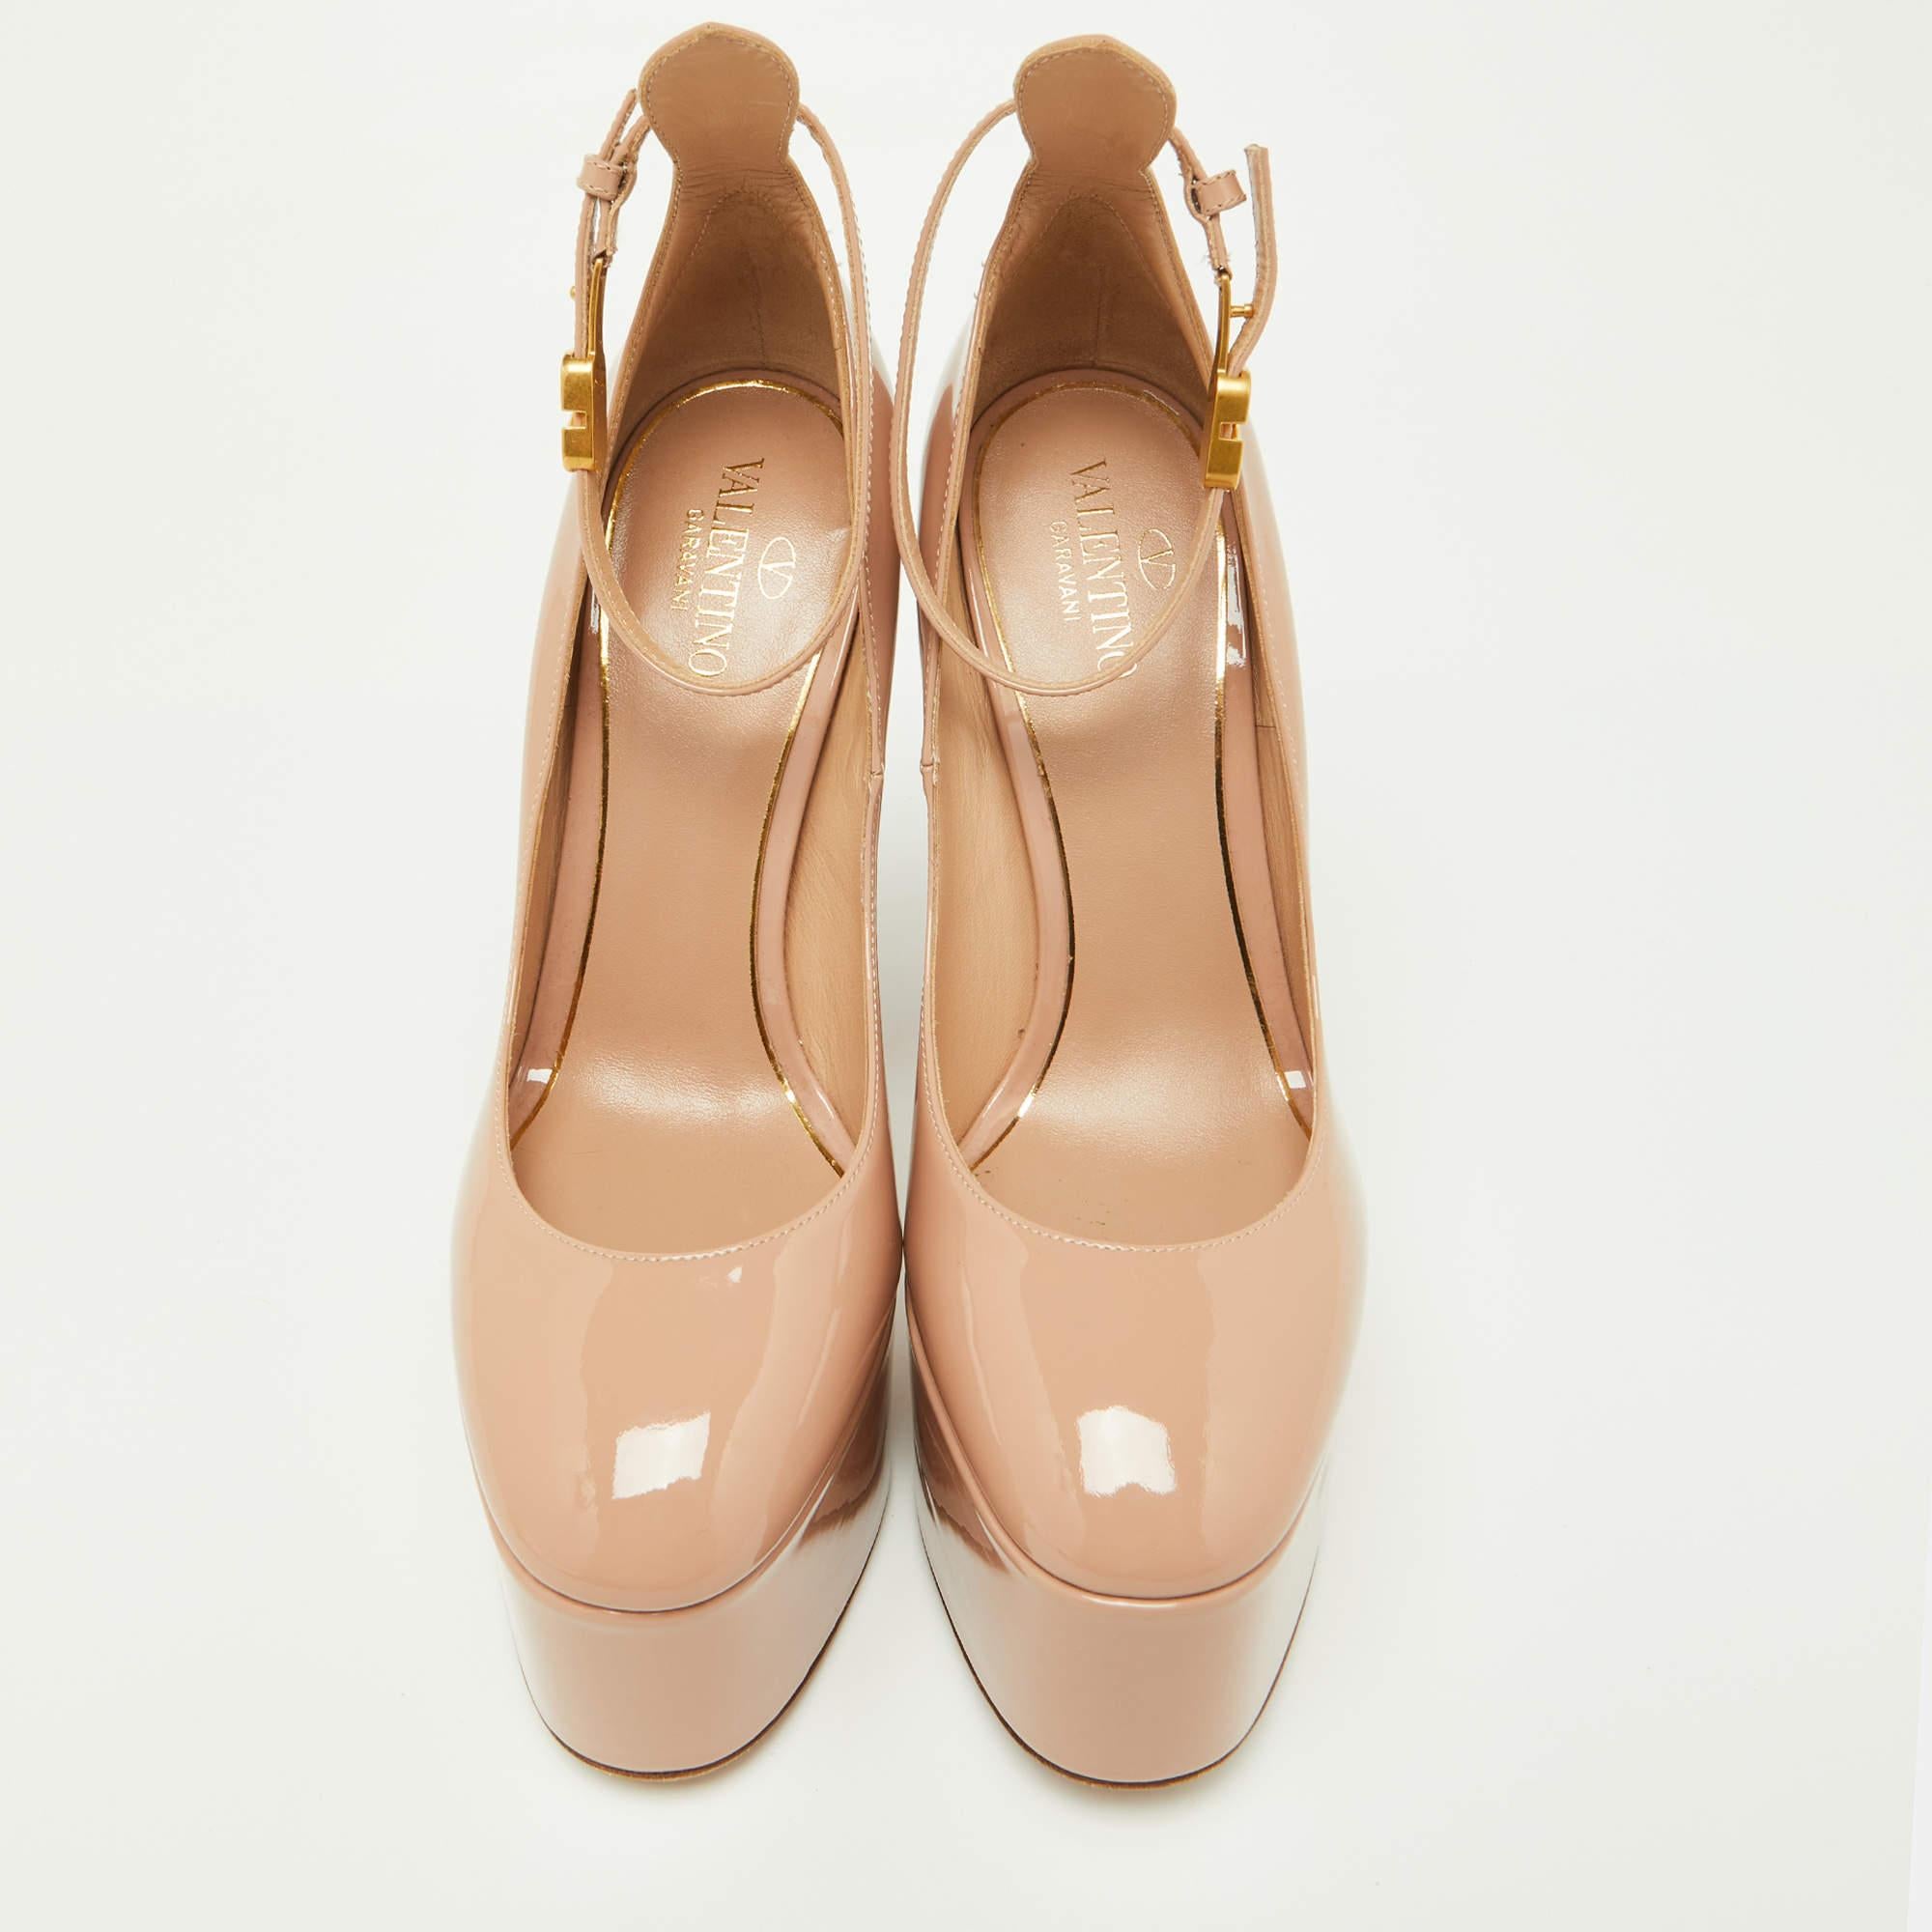 Exuding femininity and elegance, these Tan-Go pumps feature a chic silhouette with an attractive design. You can wear these pumps for a stylish look.

Includes: Original Dustbag, Info Booklet

